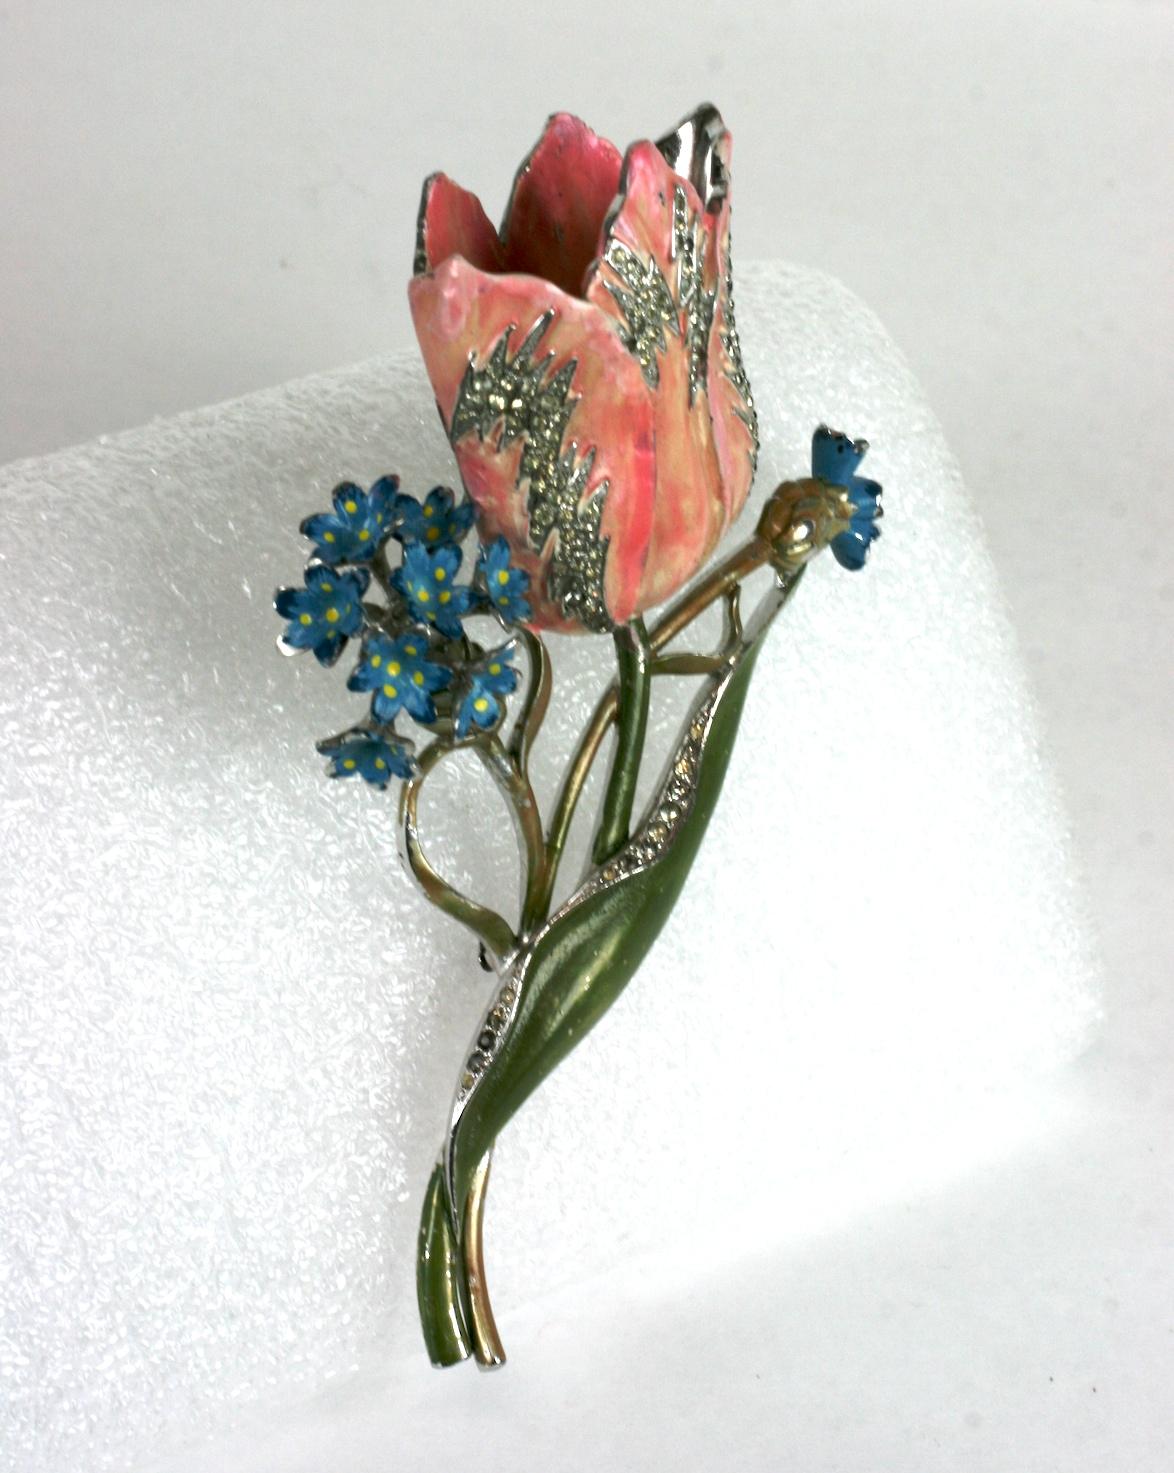 Large extraordinary Art Deco Mazer tulip and forget me knot bouquet brooch of pale peach pink and olive green pearlized cold enamel with accents of blue gloss cold enamel. The large tulip flower head further enhanced with fine crystal rhinestone